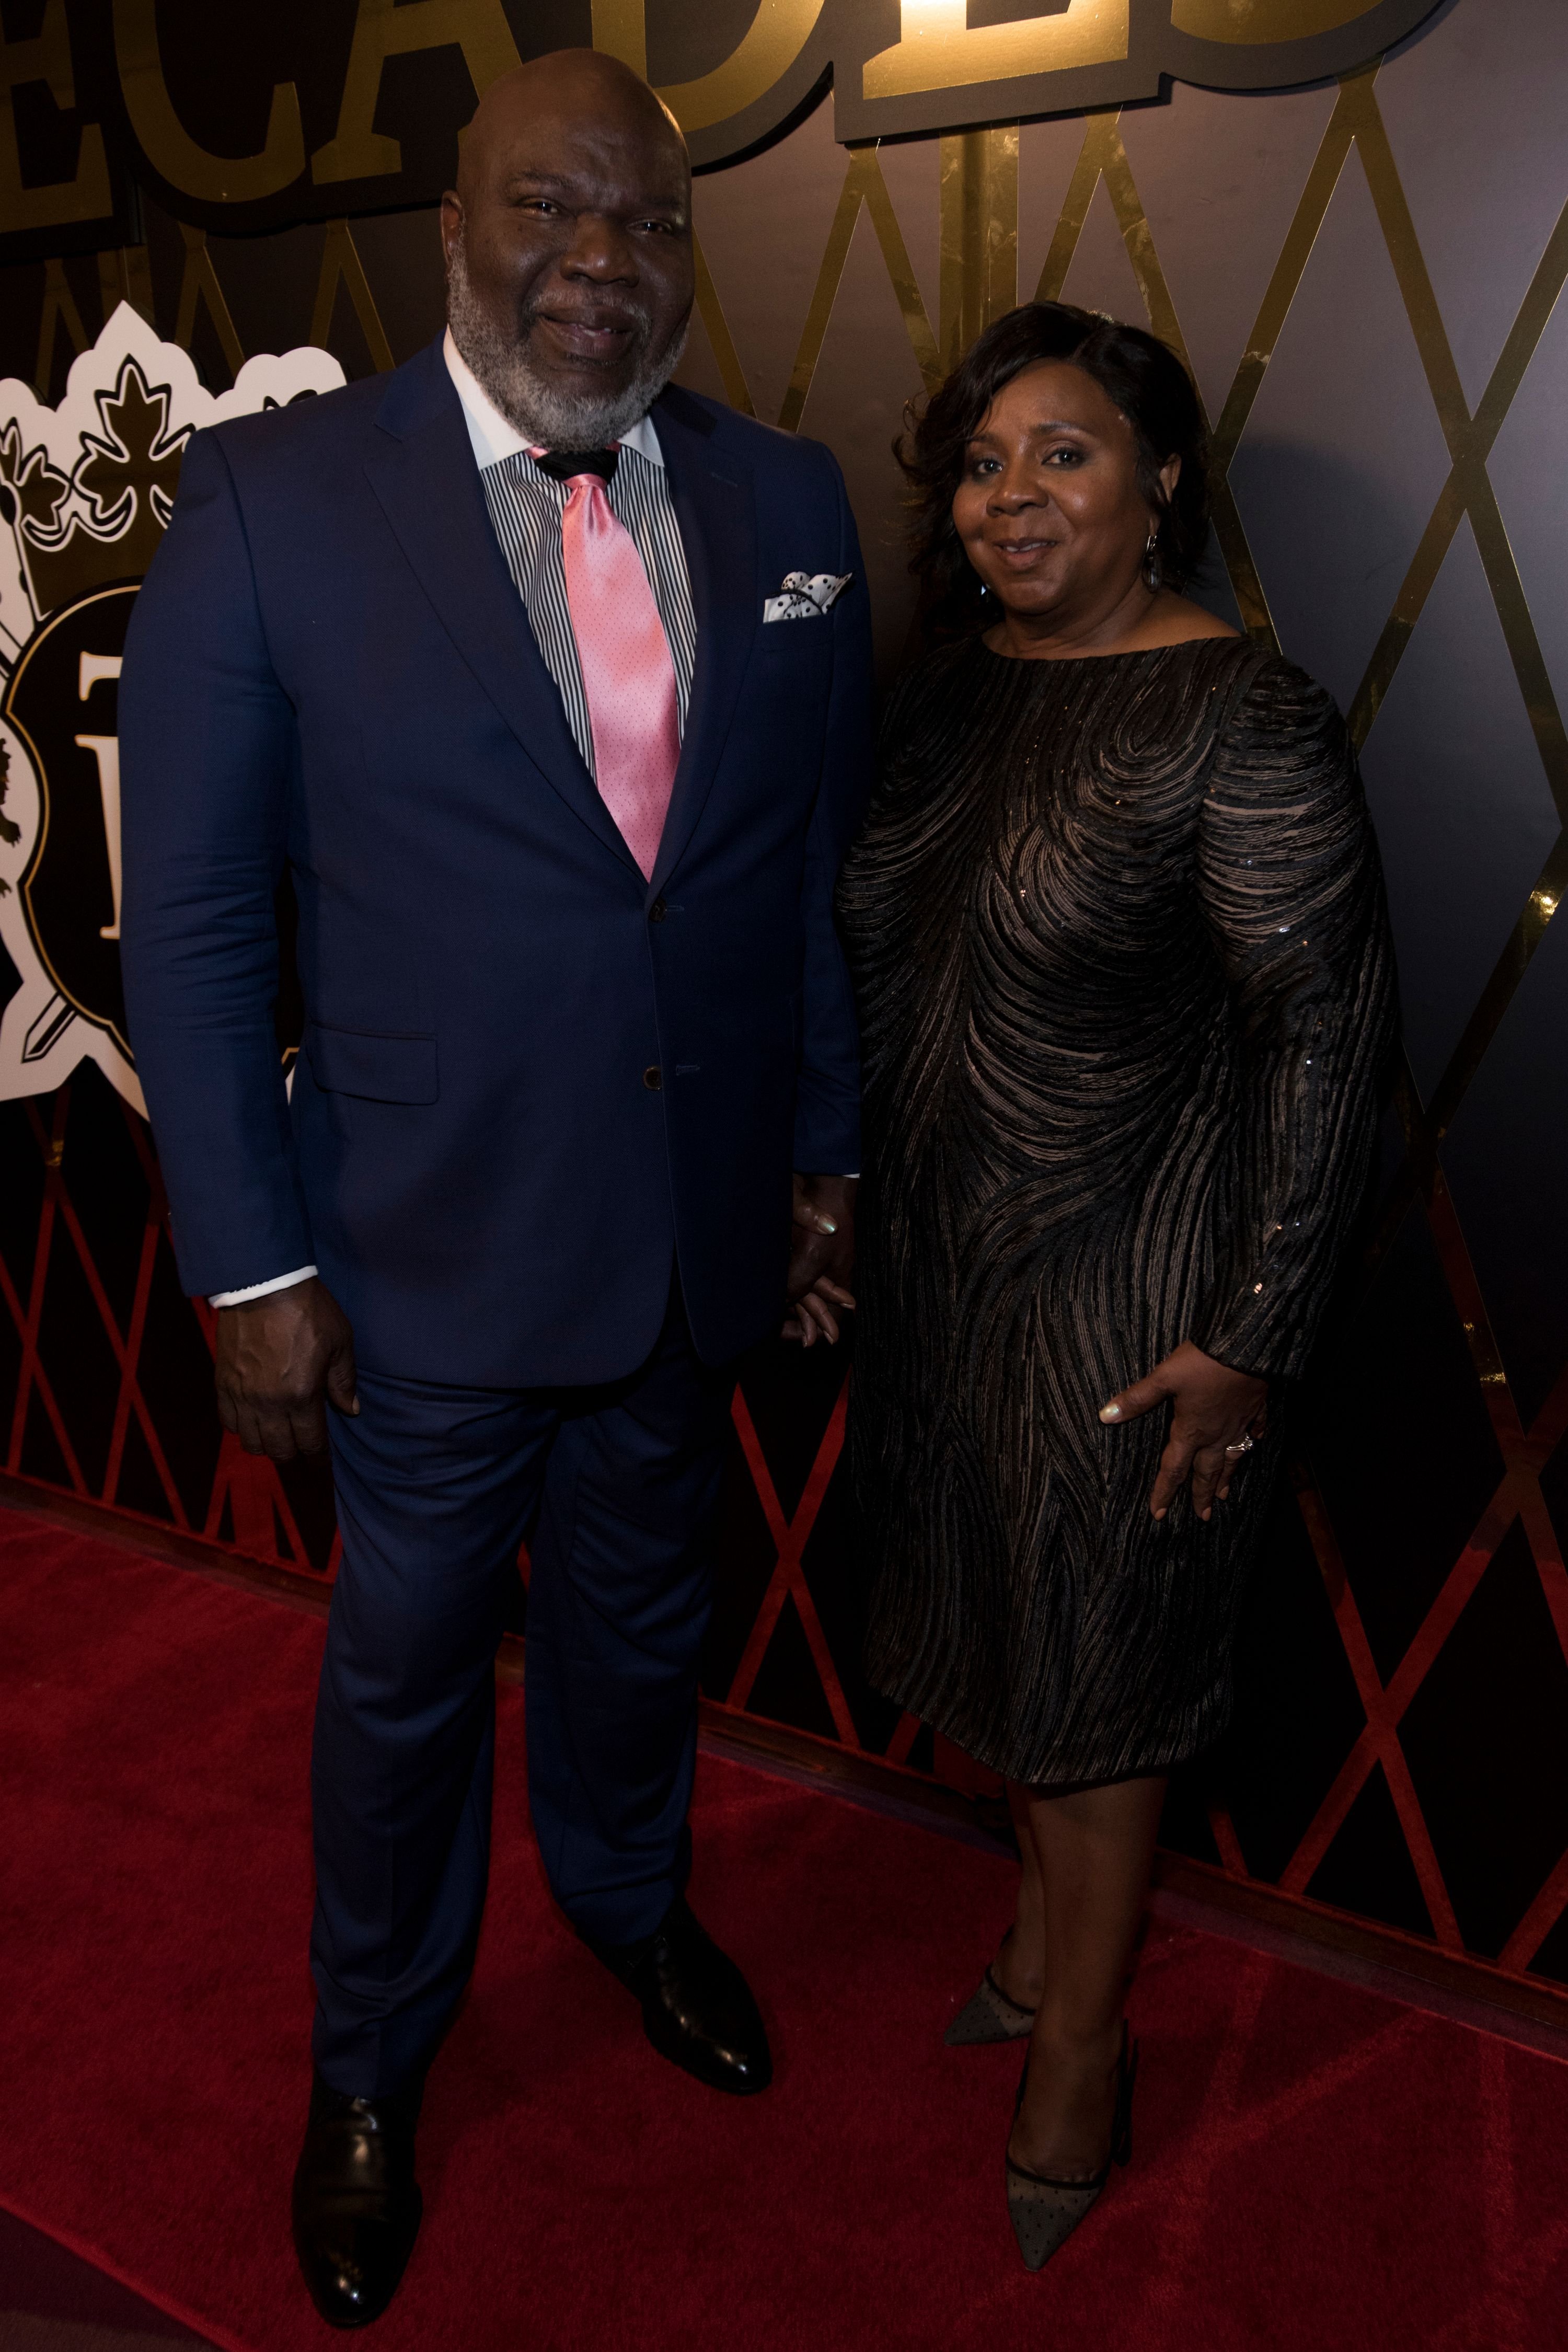 Bishop T.D. Jakes and his wife Serita Jakes pose for a photo at Bishop T.D. Jakes' surprise 60th birthday celebration at The Joule Hotel on June 30, 2017 in Dallas, Texas. | Source: Getty Images